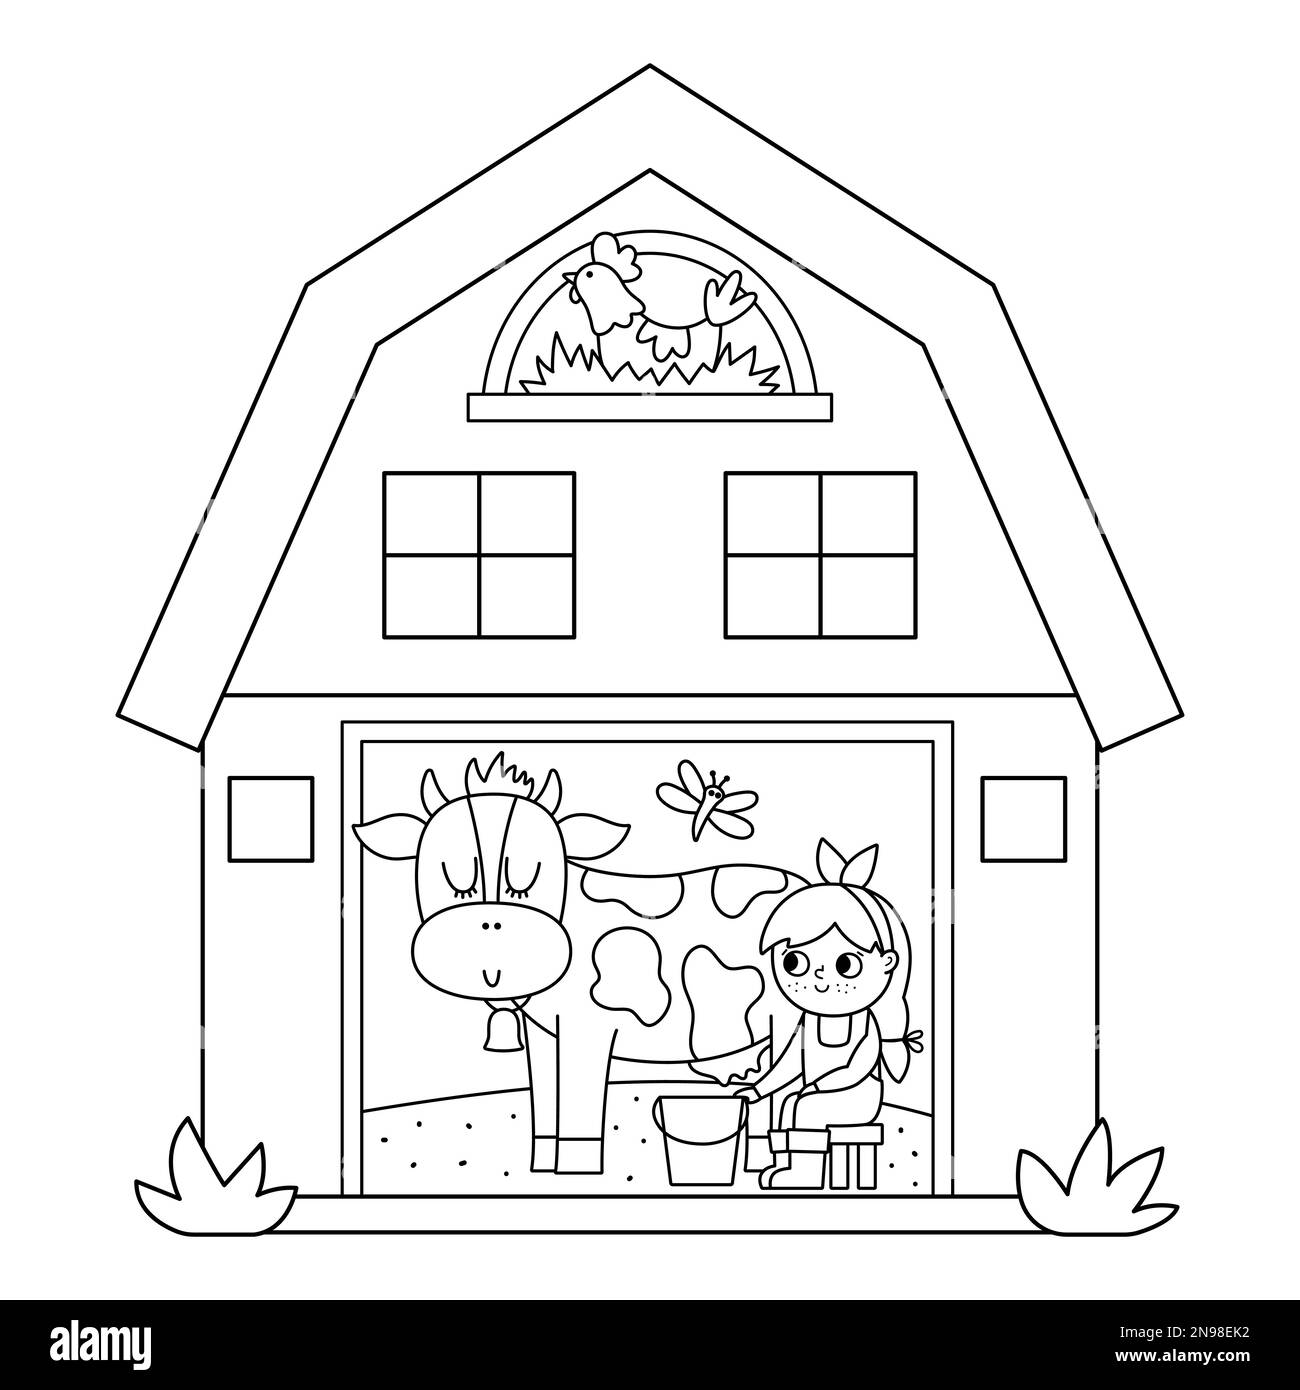 Vector black and white barn icon with girl milking cow inside. Outline farm shed coloring page. Woodshed with windows and hen in the nest. Rural or ga Stock Vector